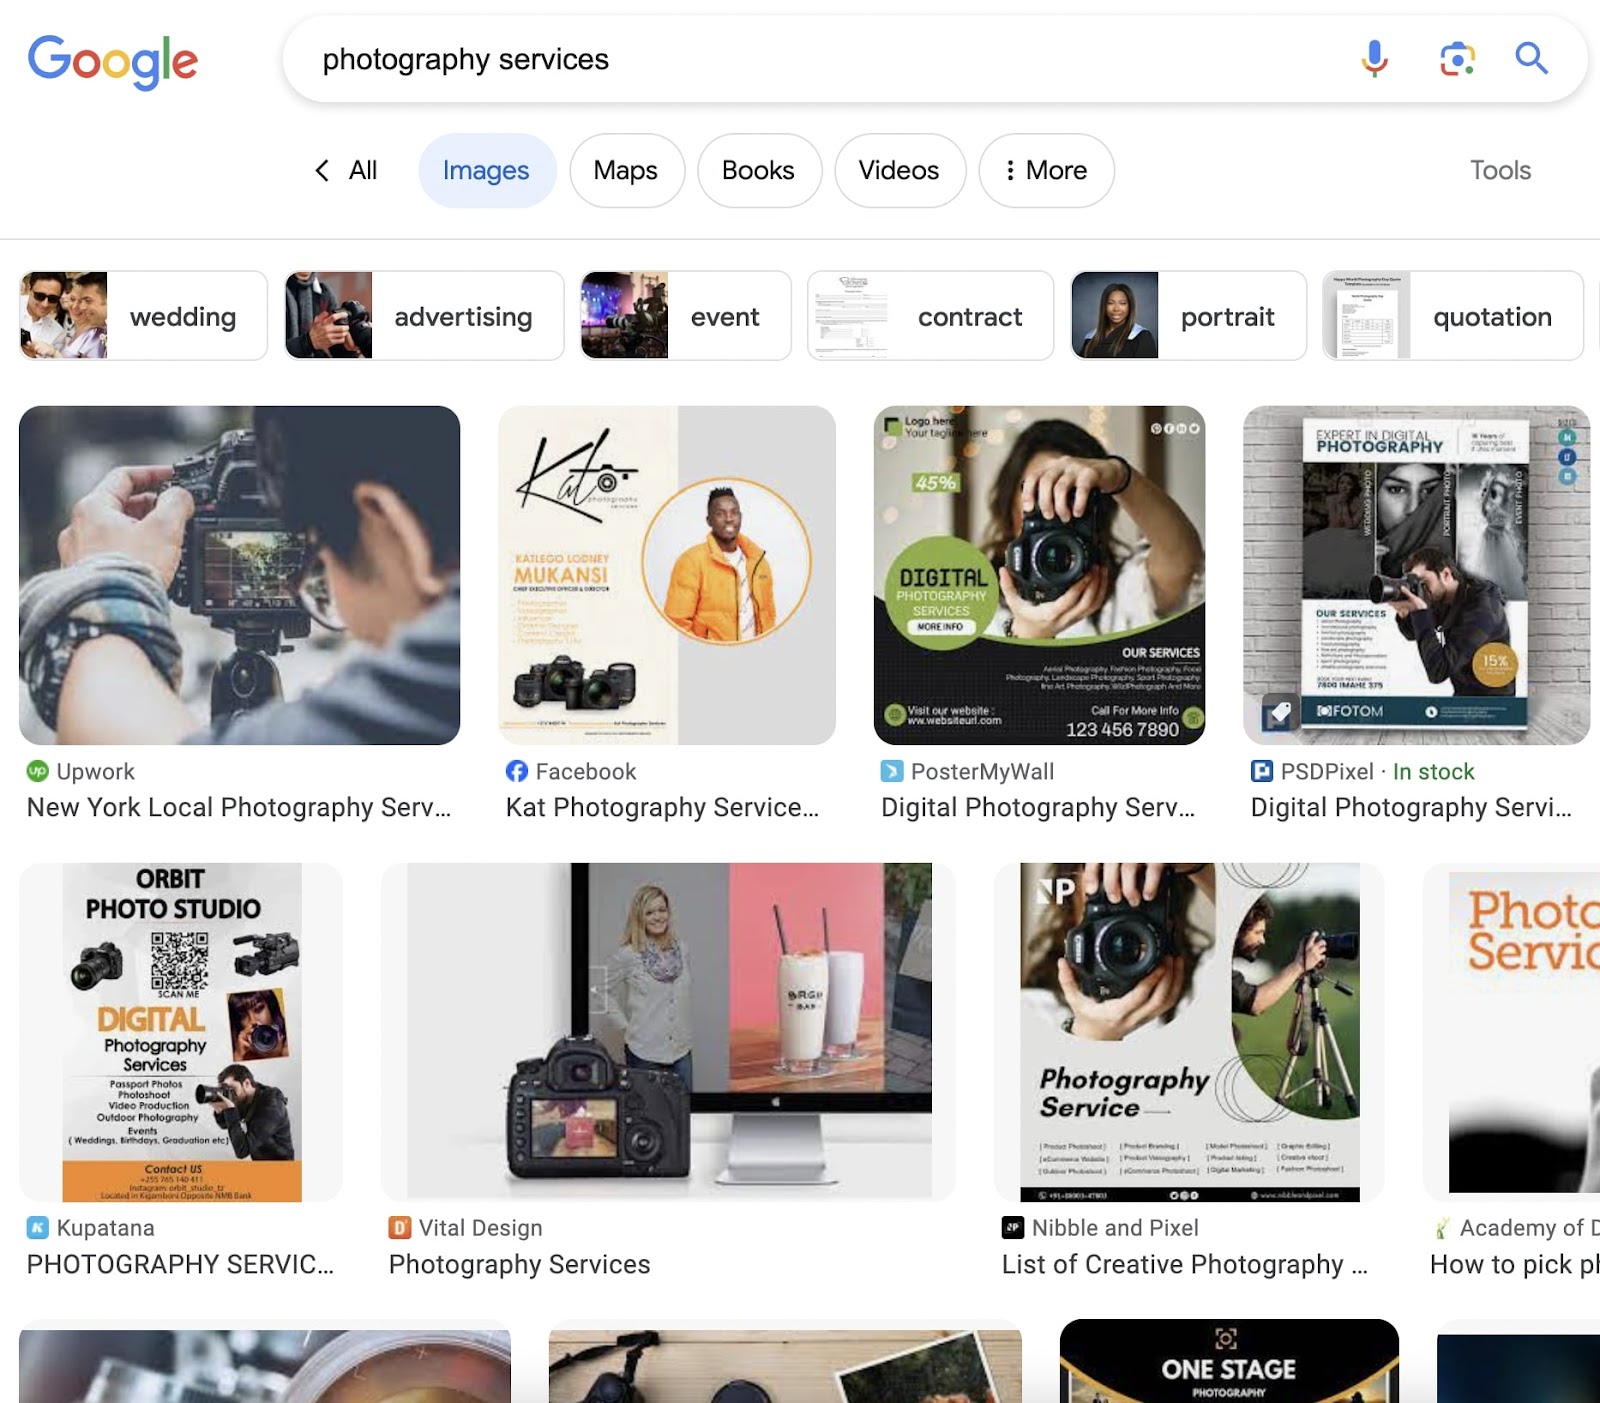 Google "Images" results for “photography services" query